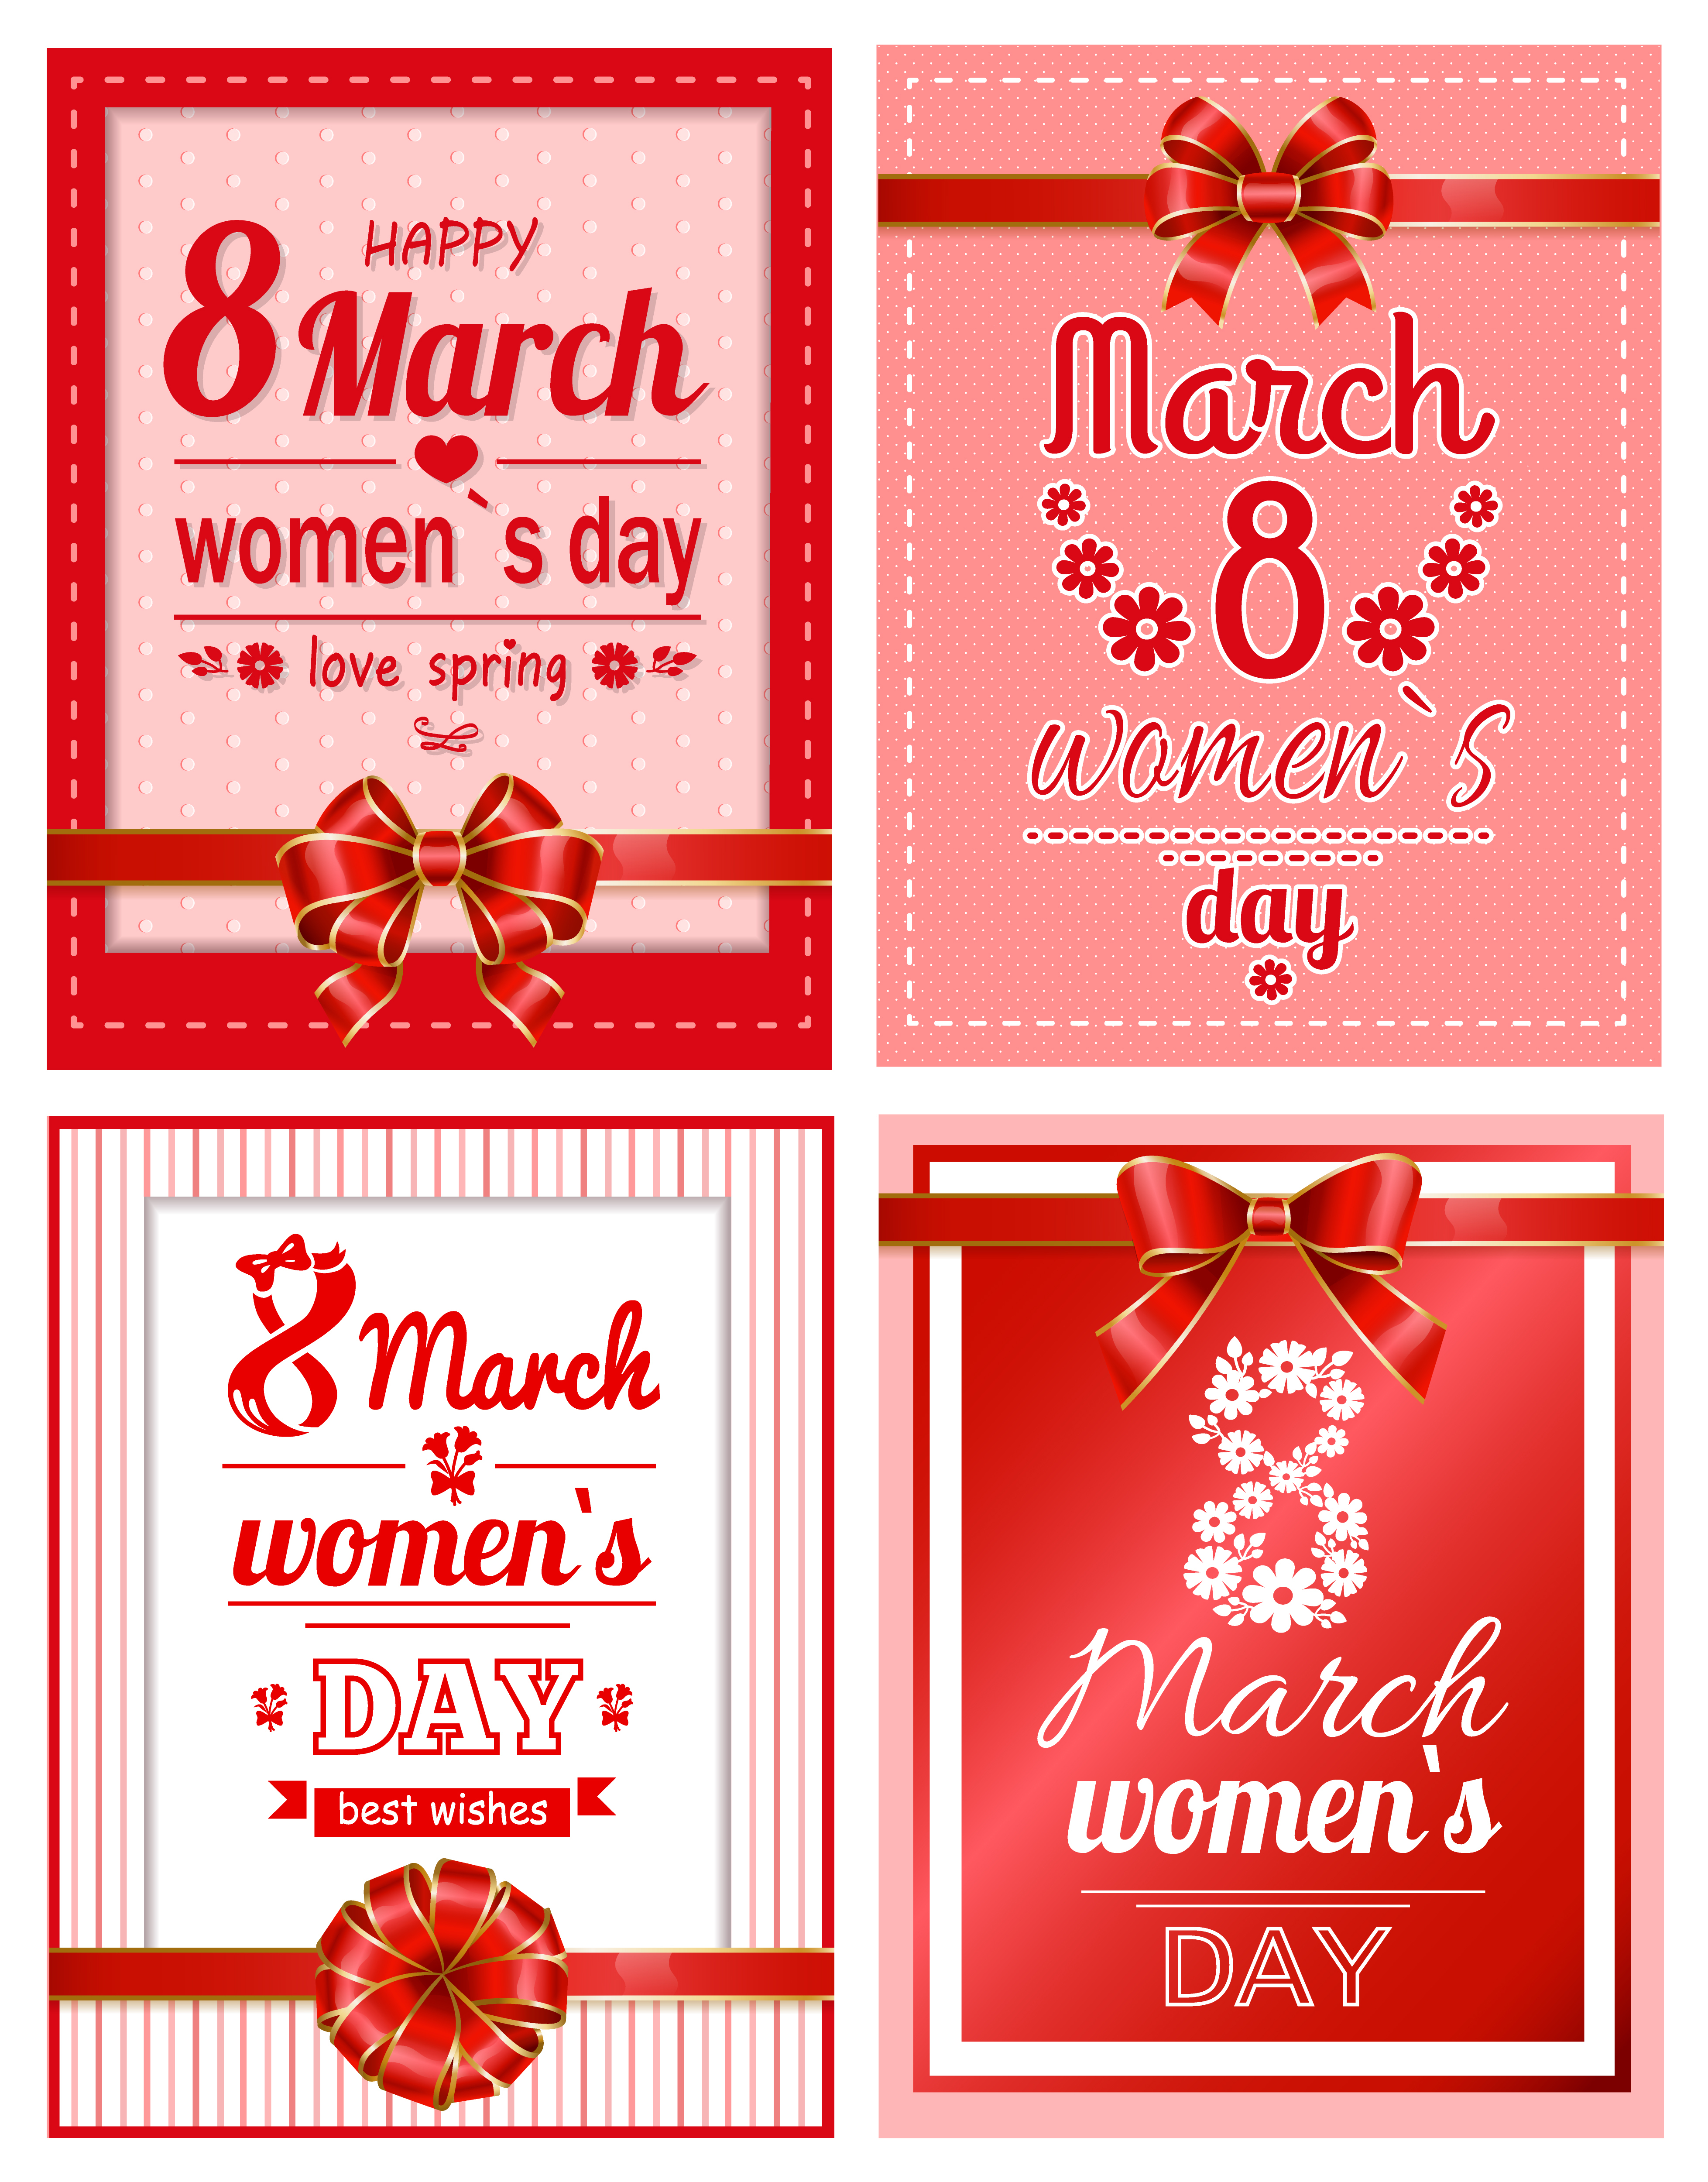 Gift cards with red ribbon 8 March Happy Womens day. Postcard of international females festive decorated by flower symbol, bow. Poster of spring holiday with best wishes, love spring vector set. Womens Day Best Wishes and Love Spring Card Vector